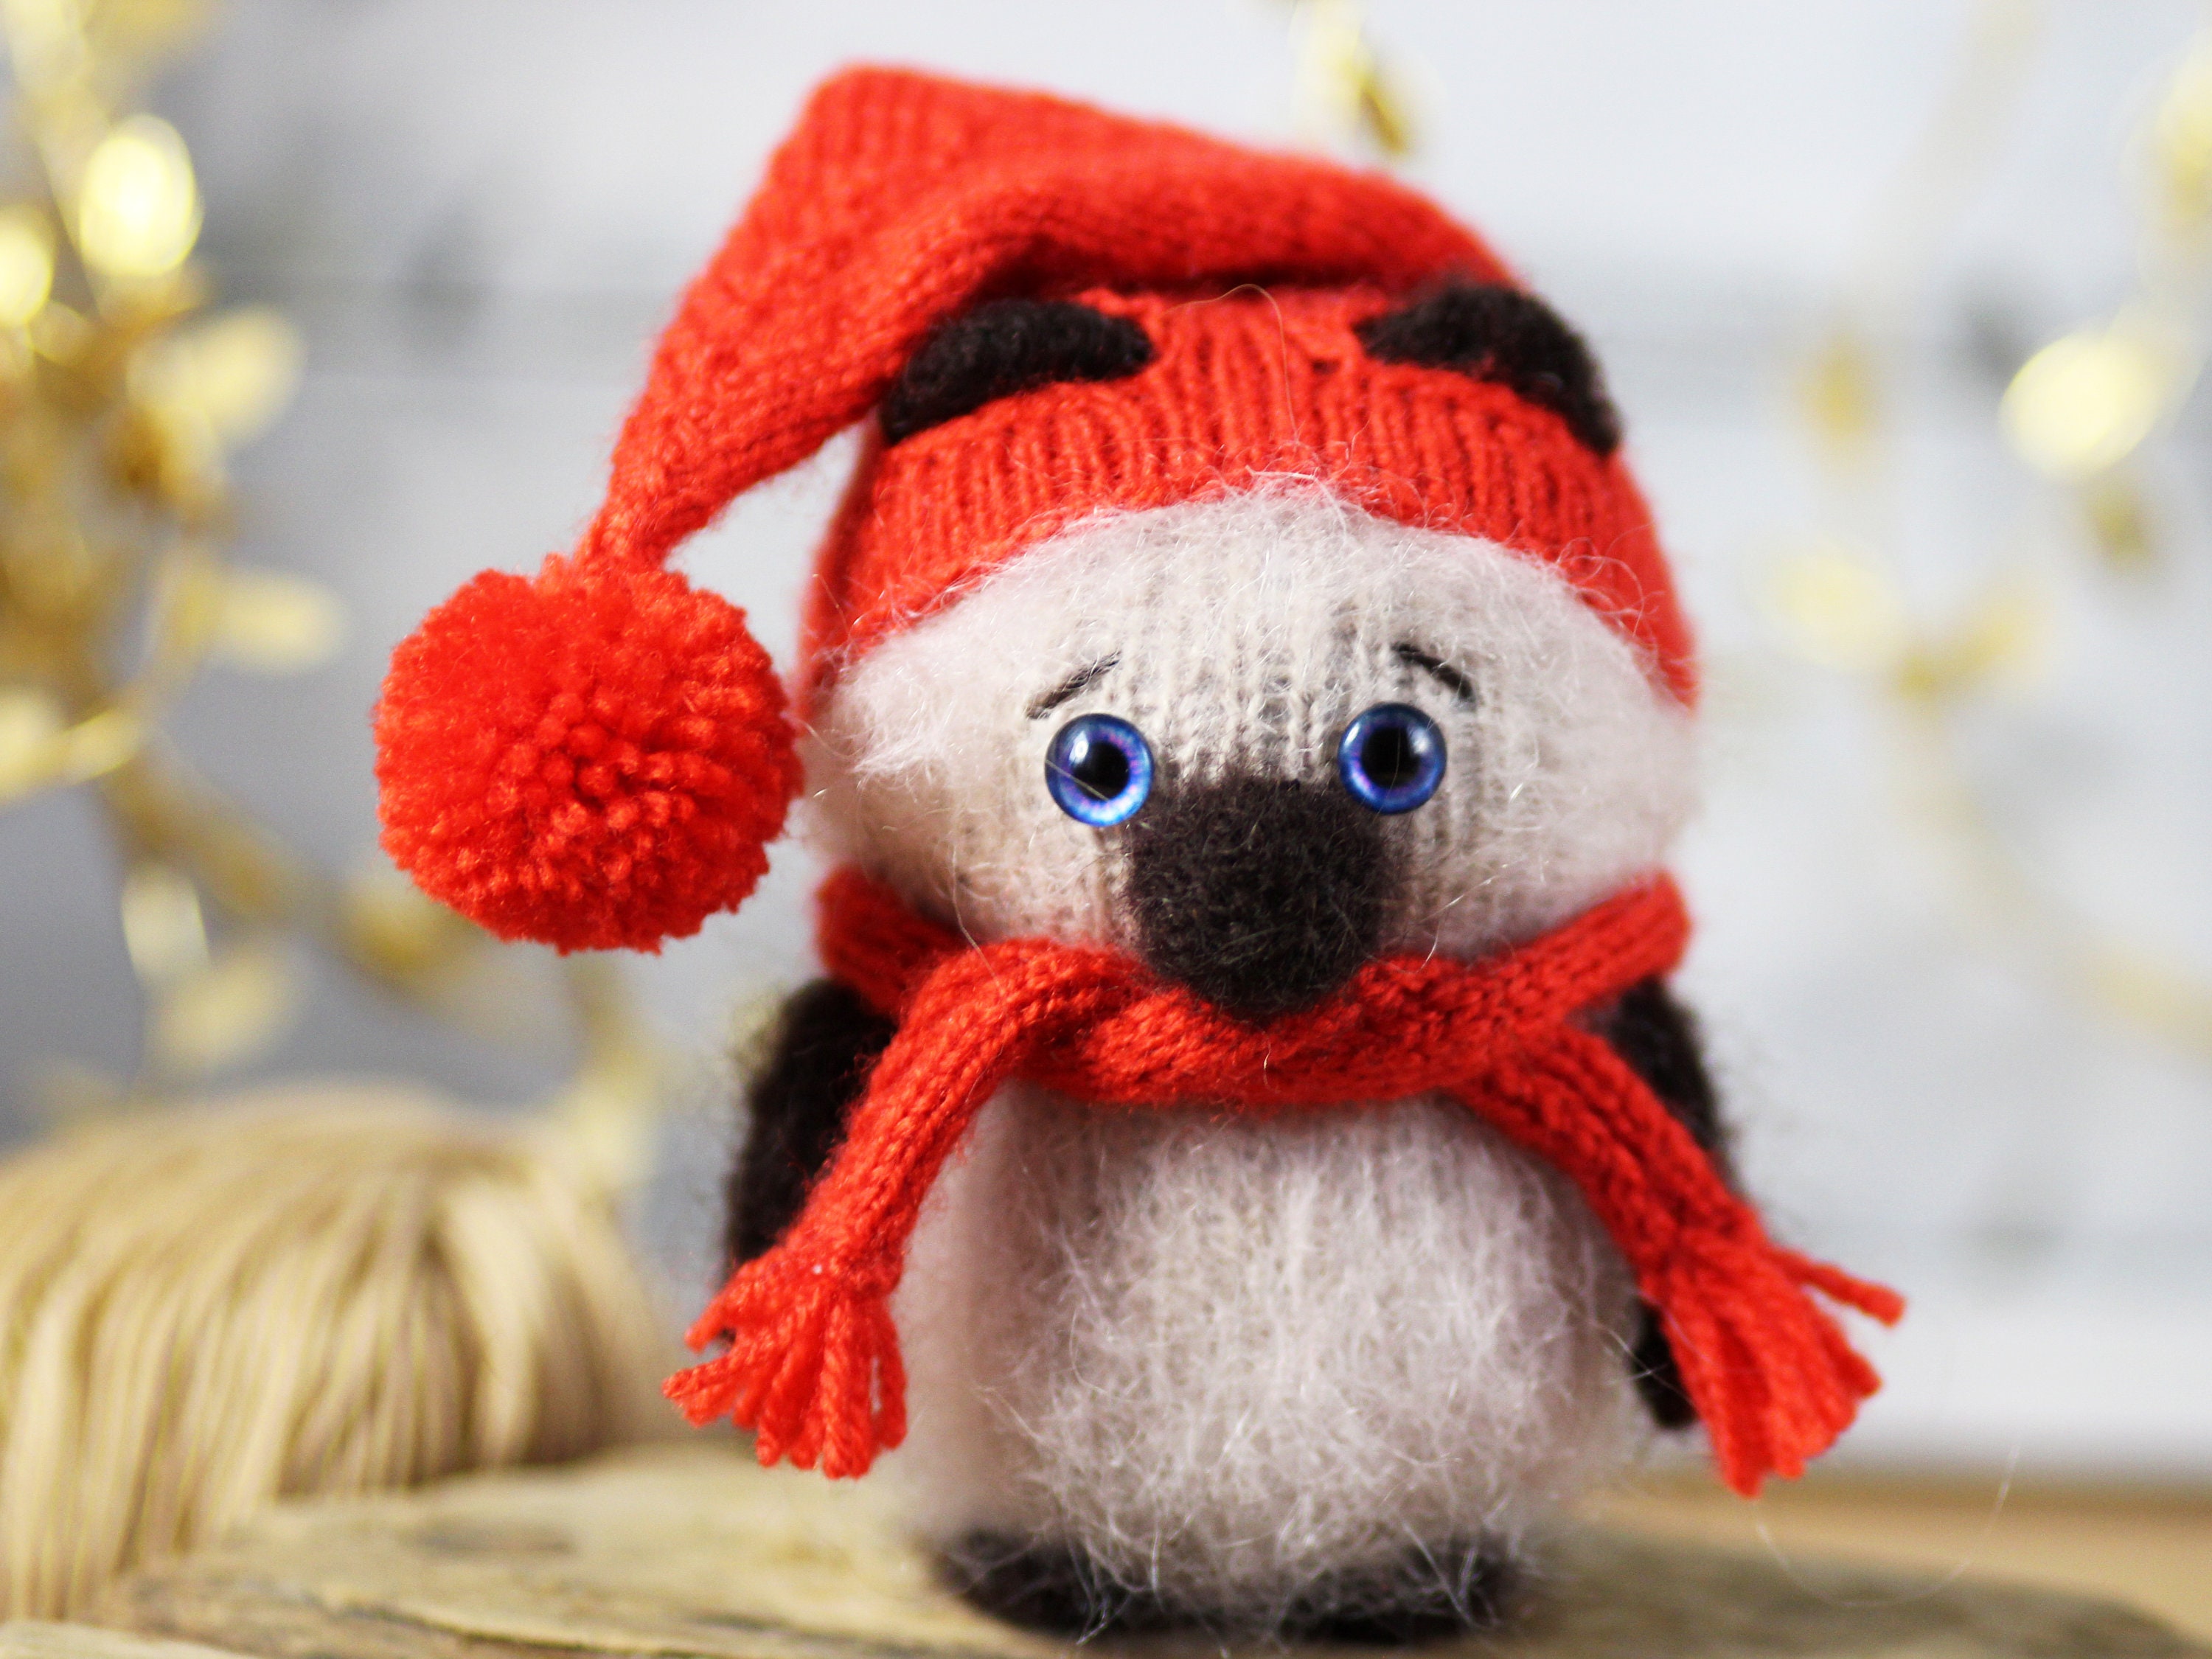 Details about   Knitted cat doll Siamese cat in red hat and scarf Stuffed cat plush handmade 